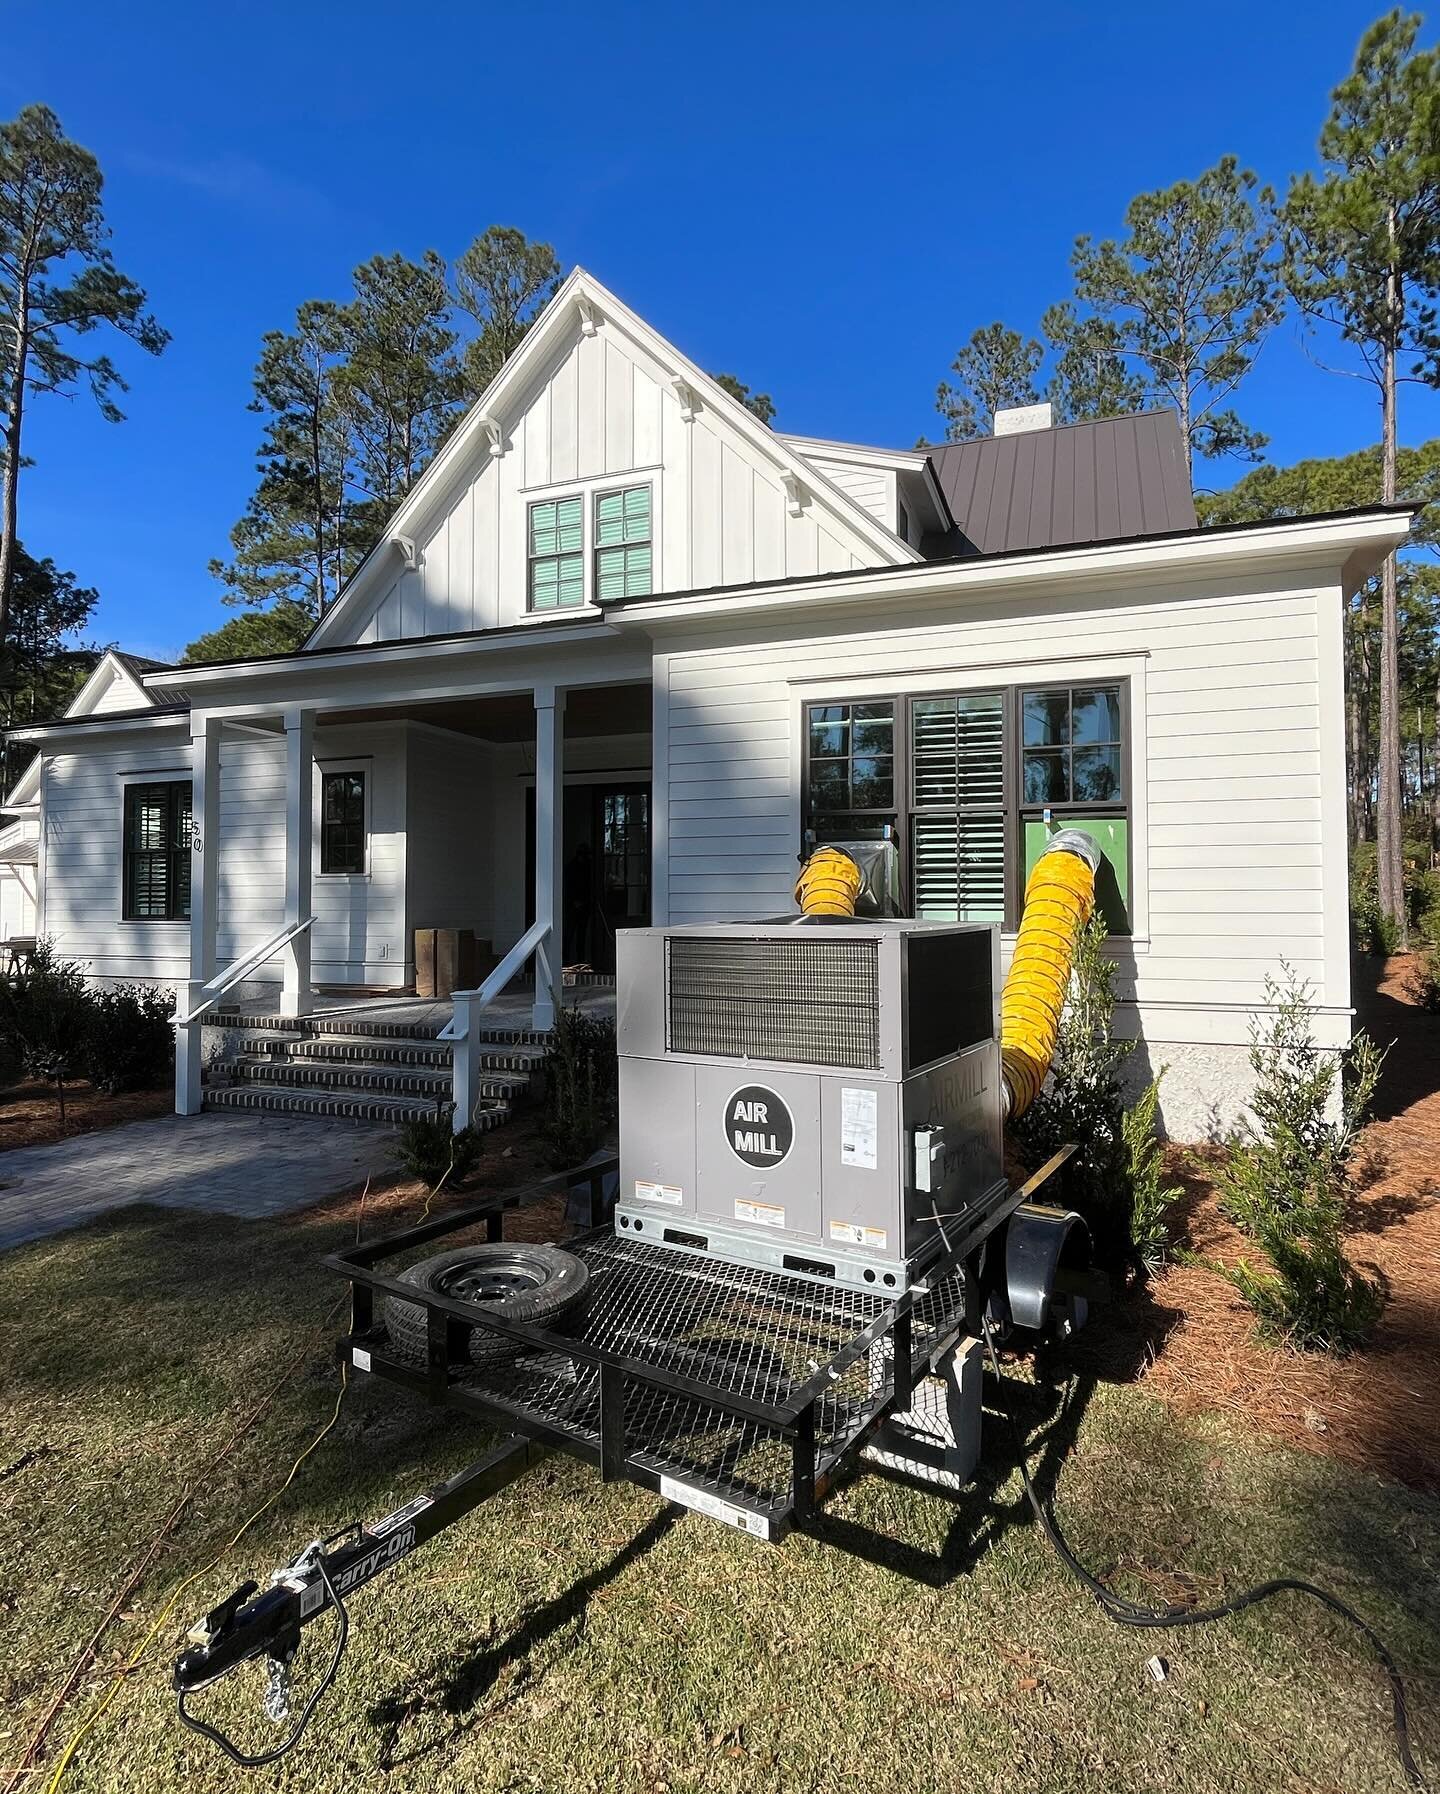 Simple. Monthly. Rental. 

No two job sites are the same. We custom fit every installation. We work closely with the contractor to balance the homes design, system efficiency, and convenience for all the builders. This project by @alairhomessavannah 